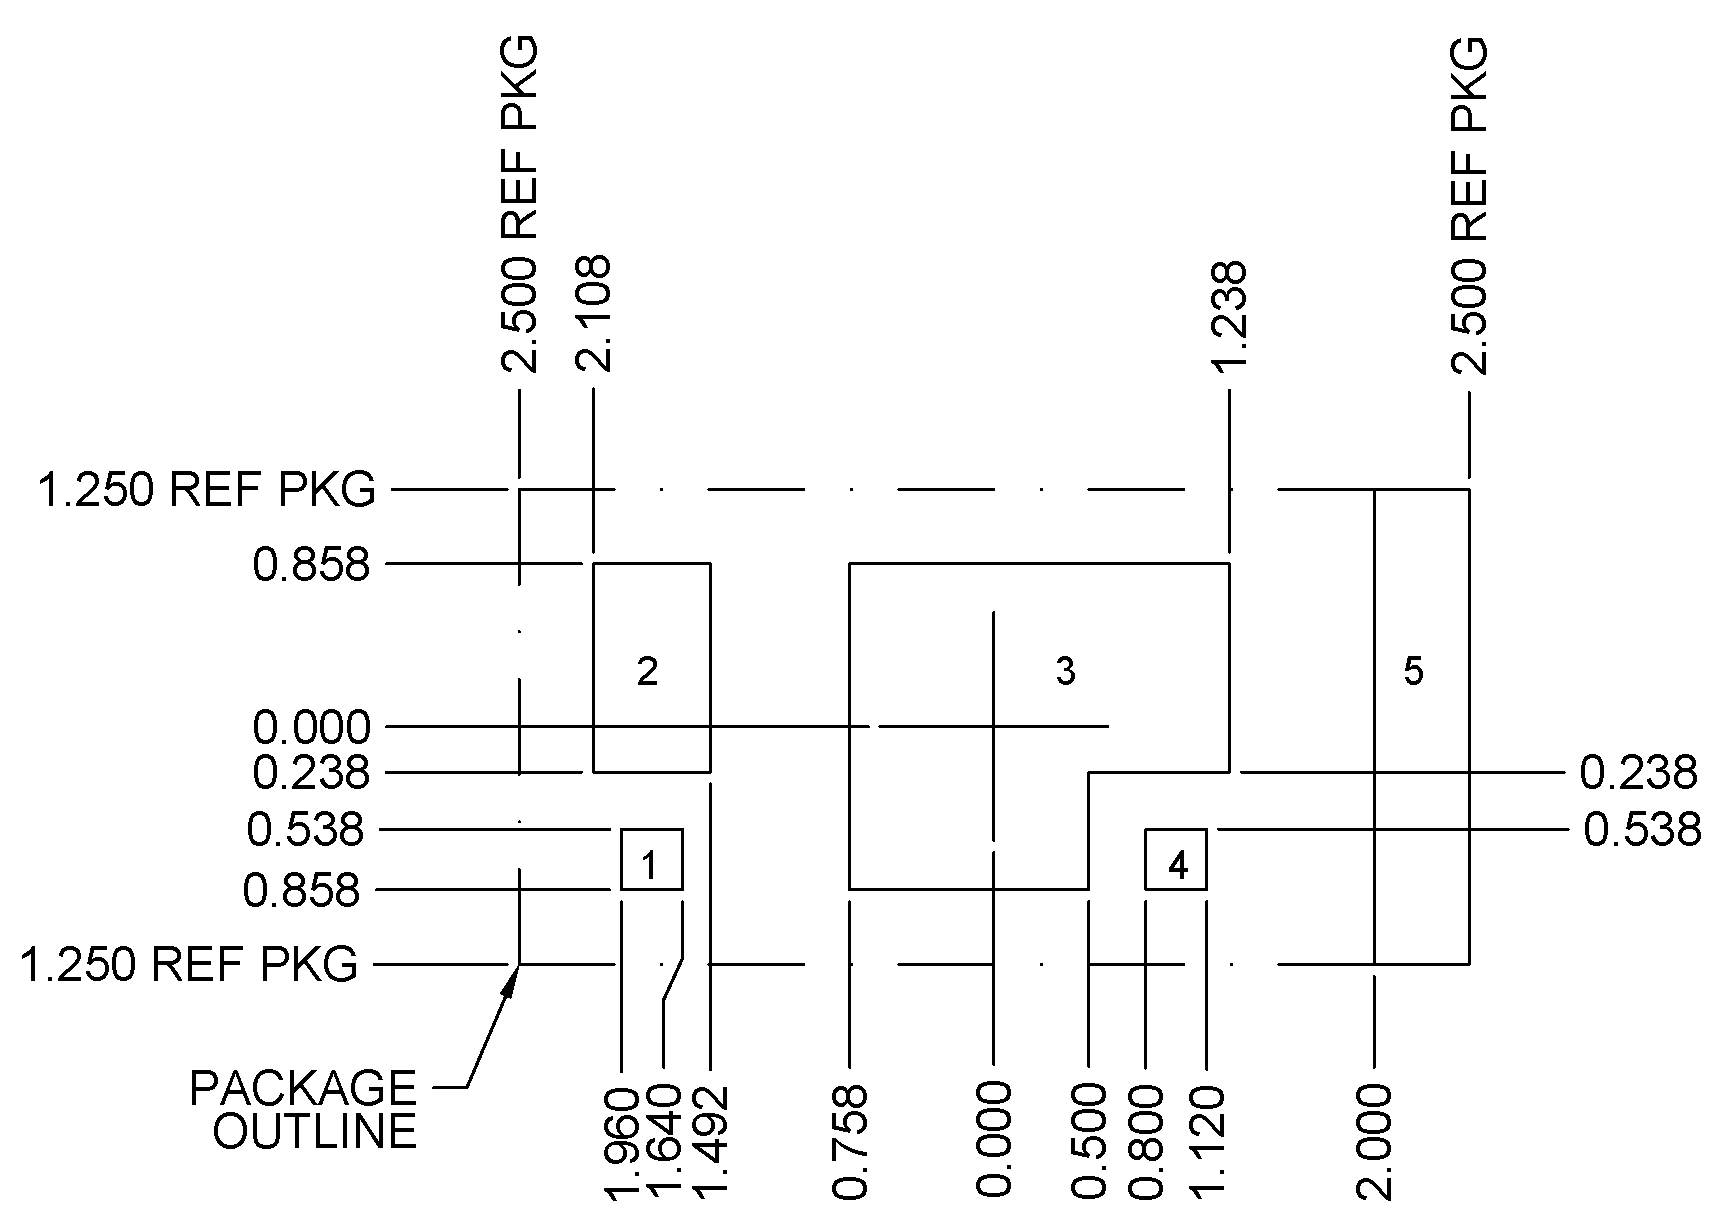 CSD87588N Recommended_PCB_Pattern.png